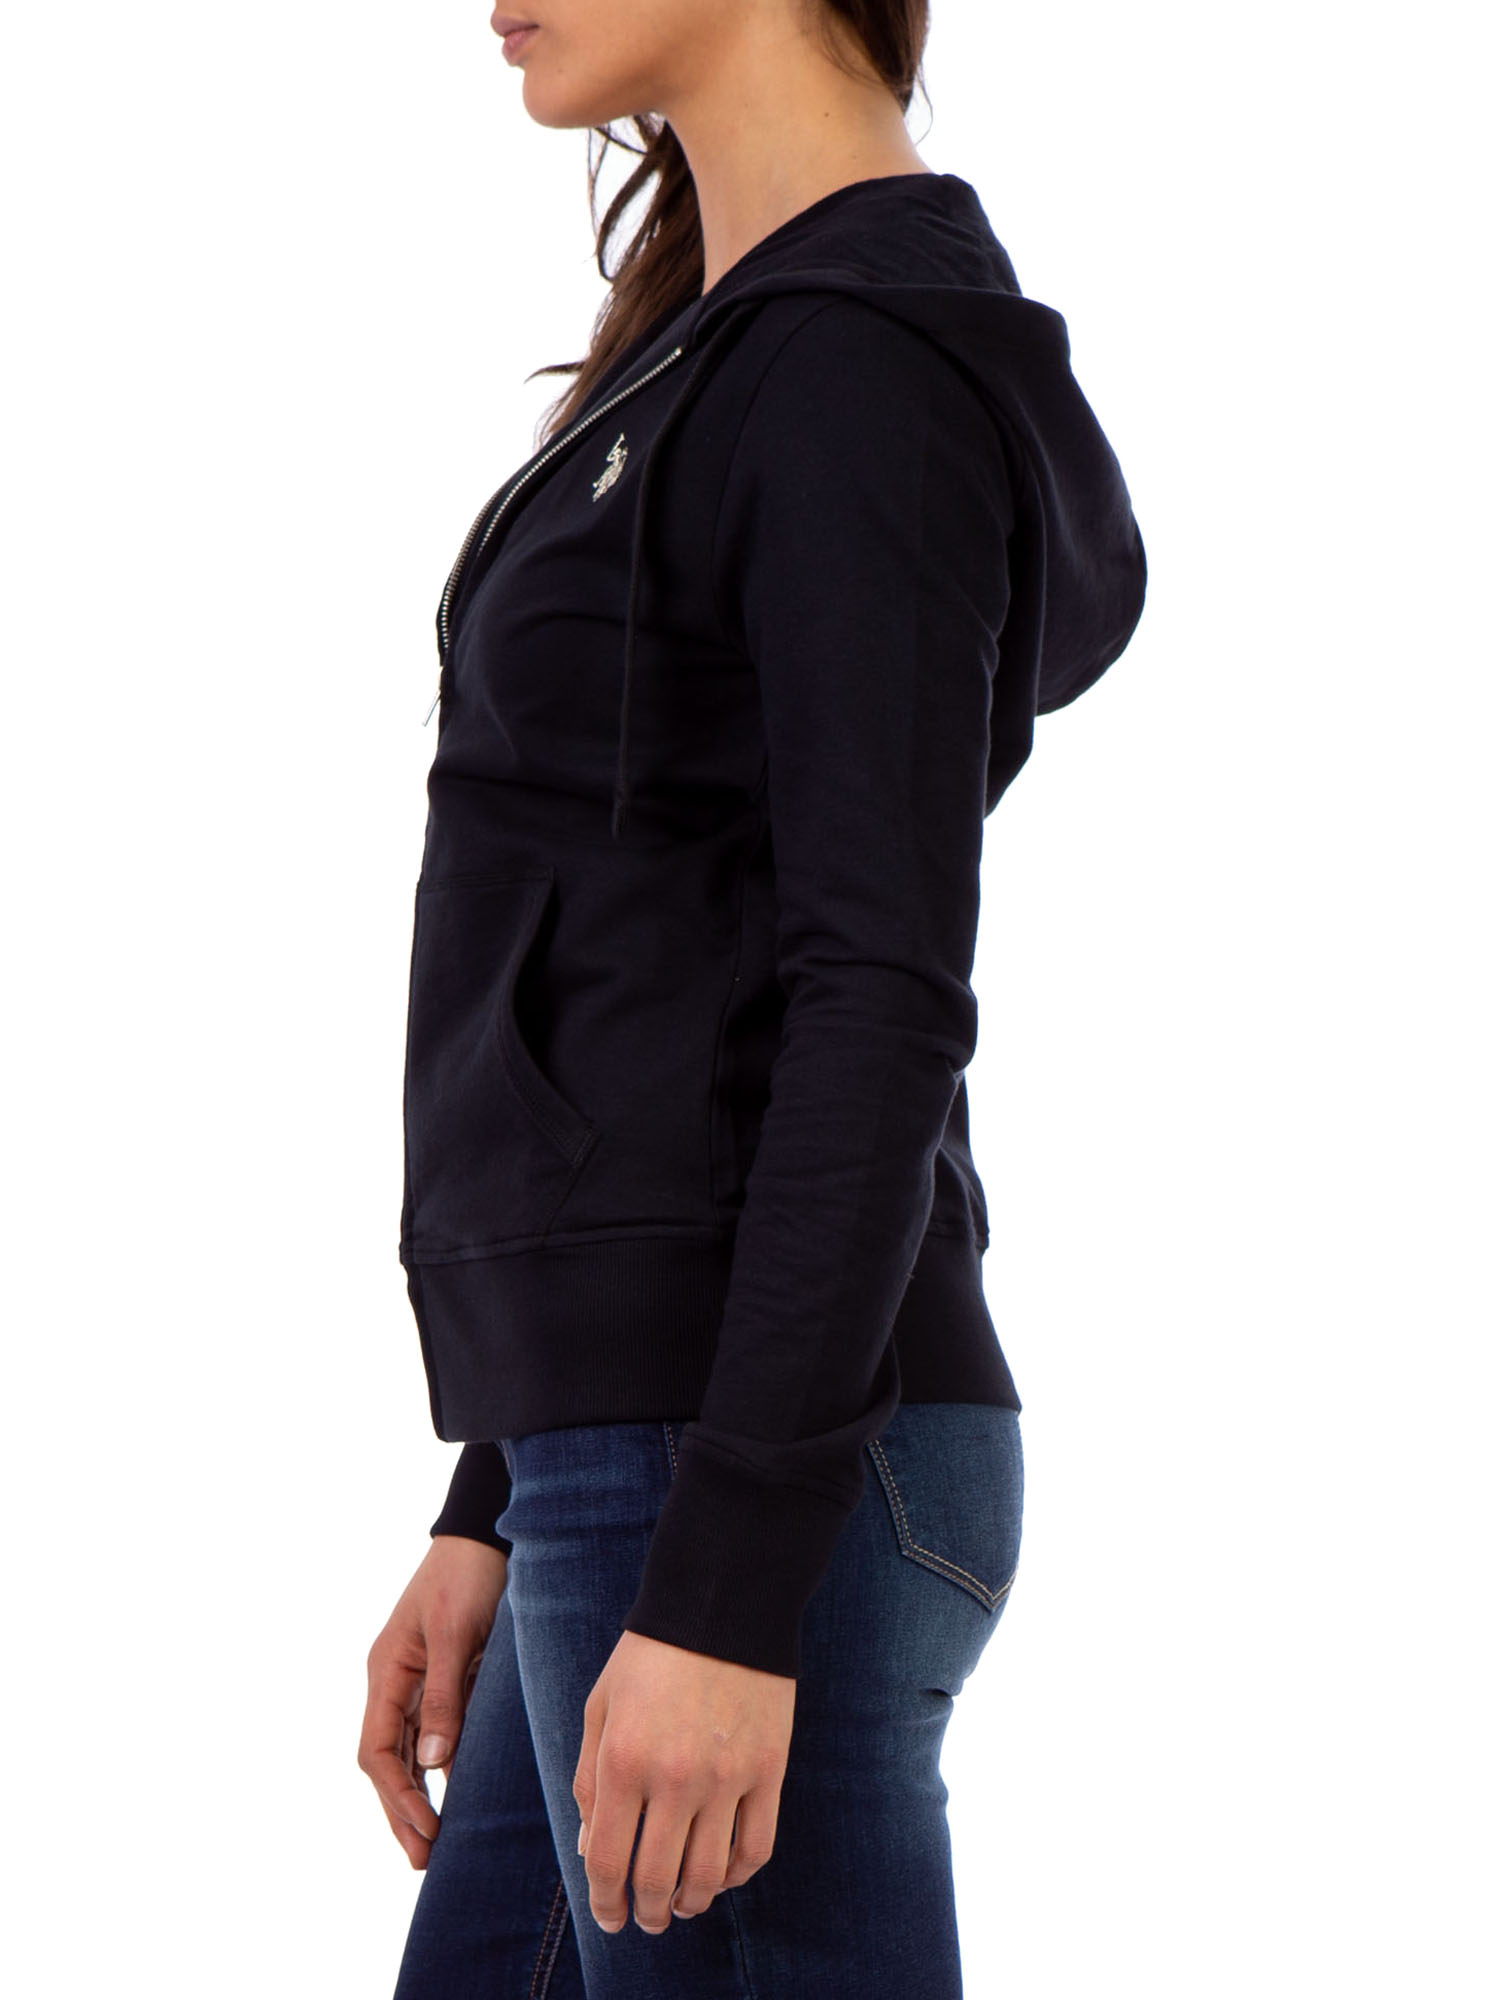 US Polo Assn. Long Sleeve Hooded Relaxed Fit Hoodie (Women's) 1 Pack - image 2 of 2